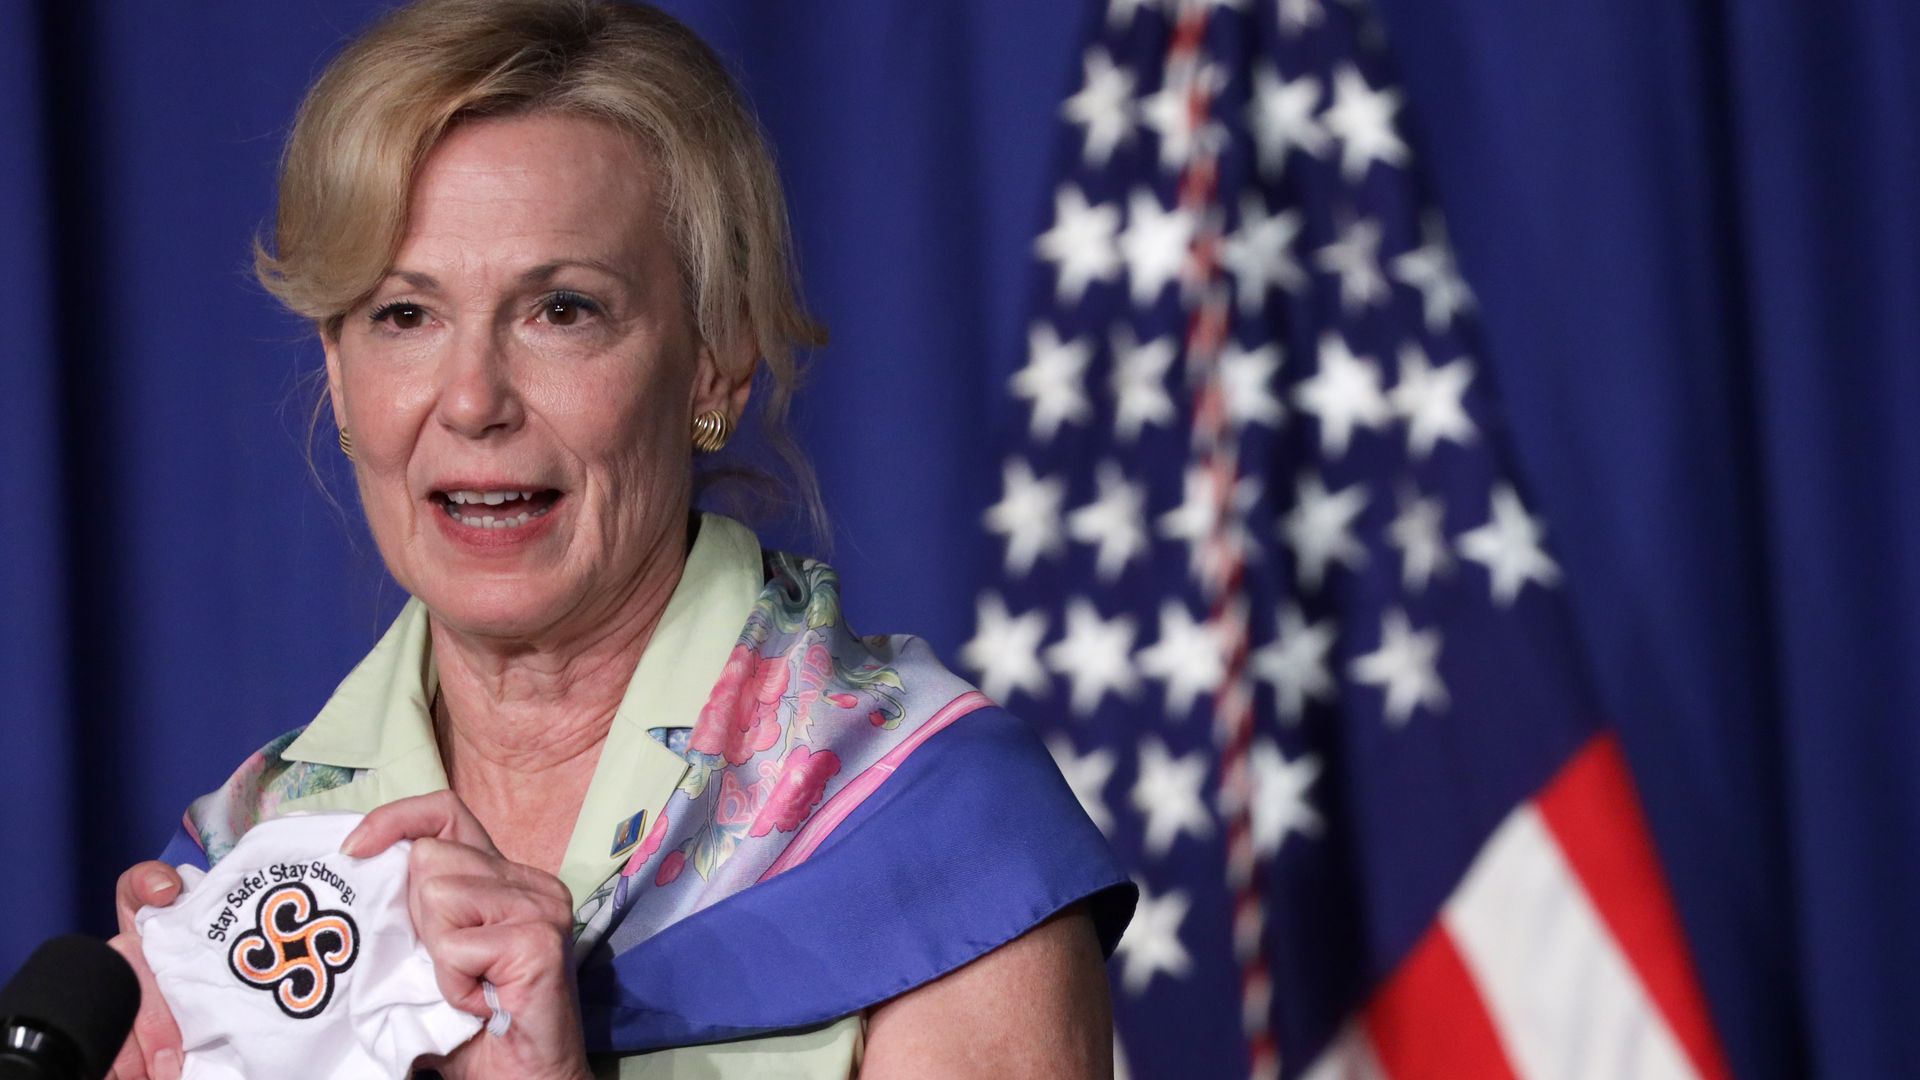 White House coronavirus response coordinator Deborah Birx during a White House Coronavirus Task Force press briefing at the U.S. Department of Education July 8, 2020 in Washington, DC